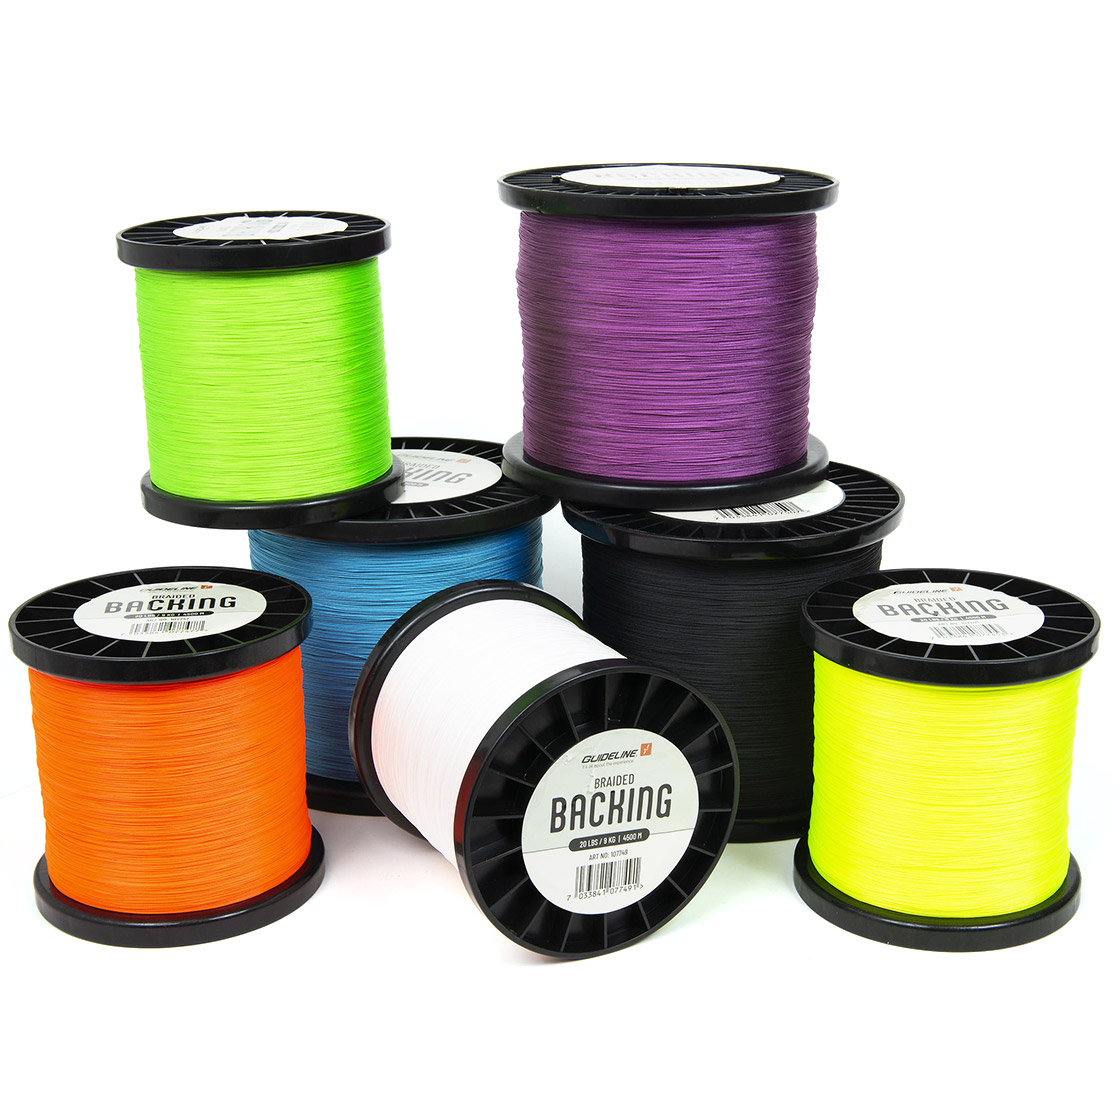 Guideline Braided Dacron Backing 30 lbs from Spool